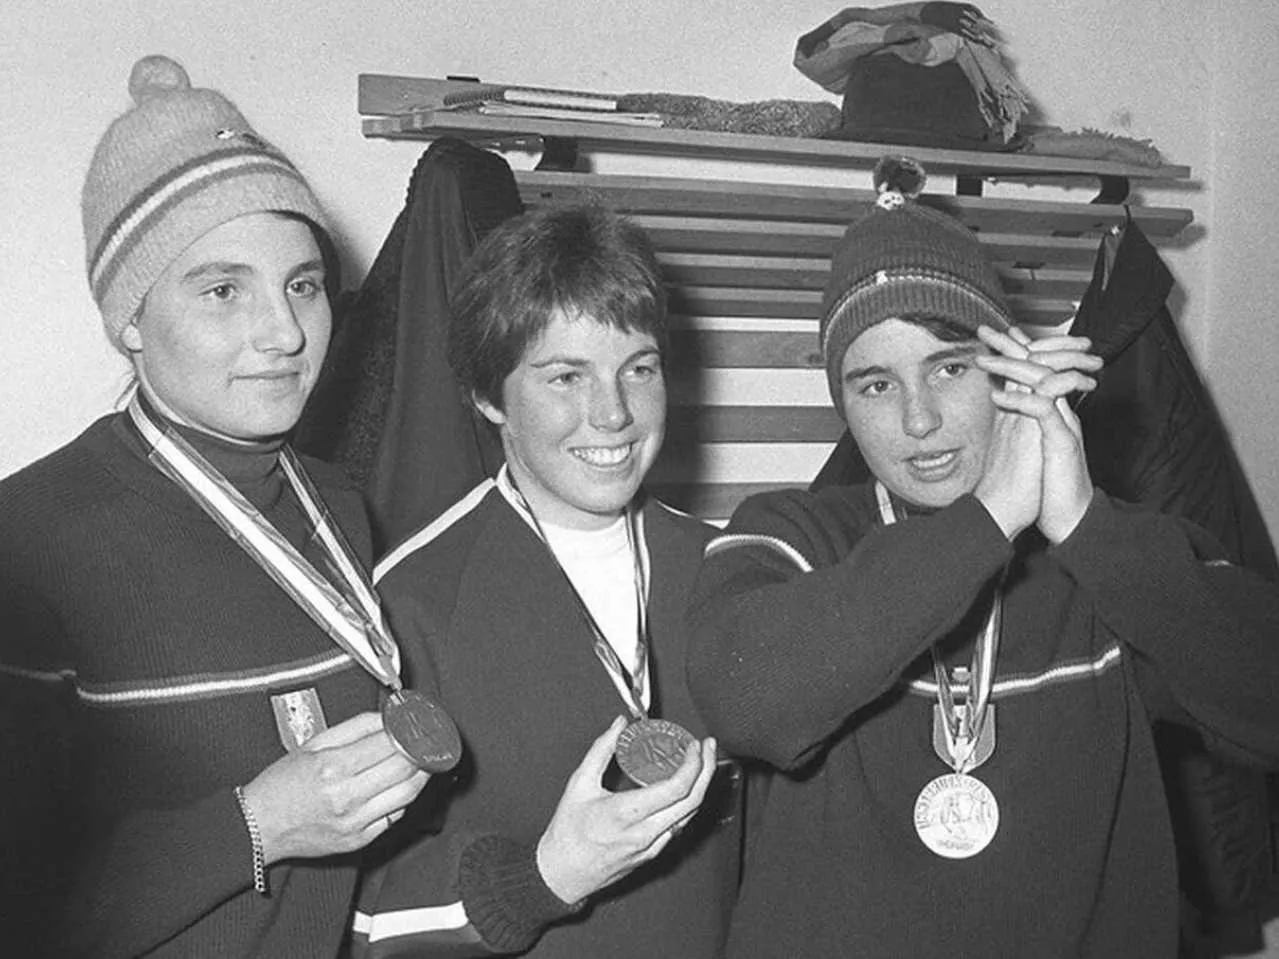 Sisters winning medals in olympic